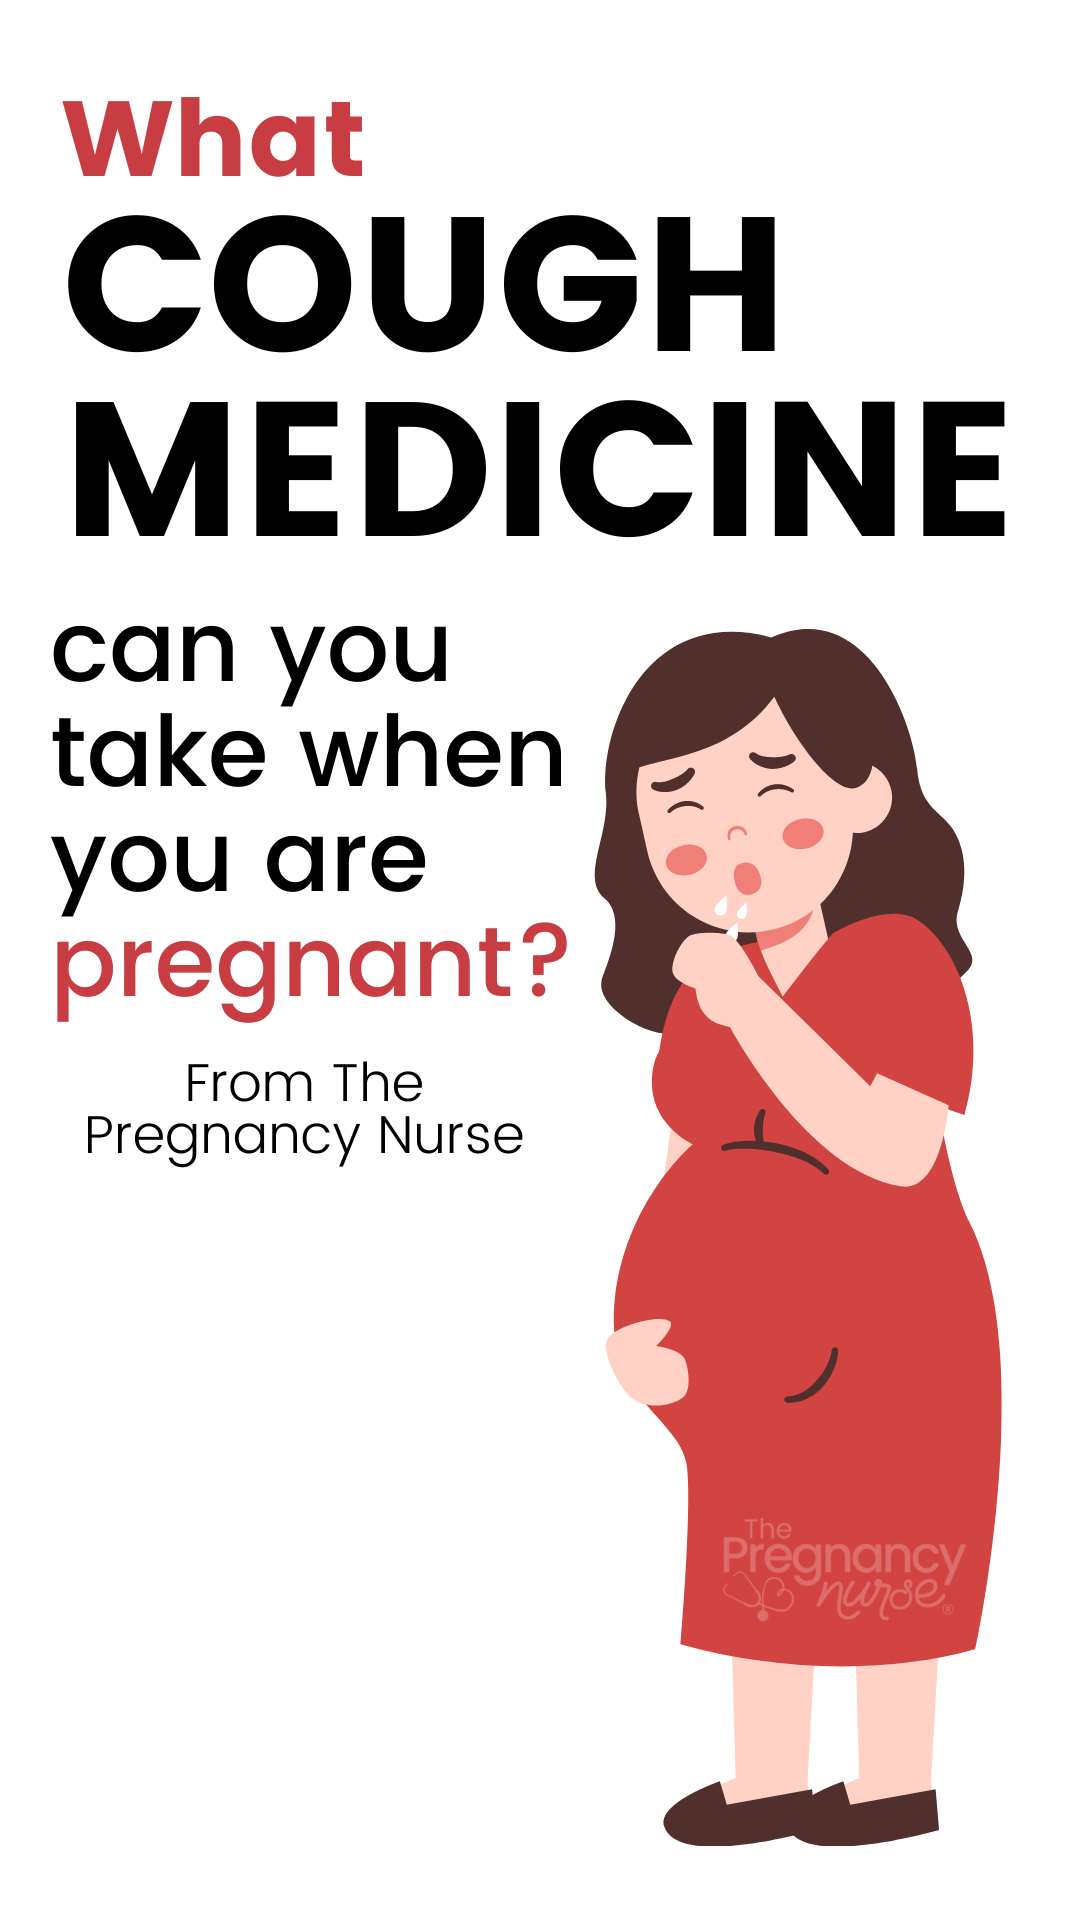 In this blog post, we will provide you with information on the safety of different cough medicines for pregnant women. Keep reading to learn more!